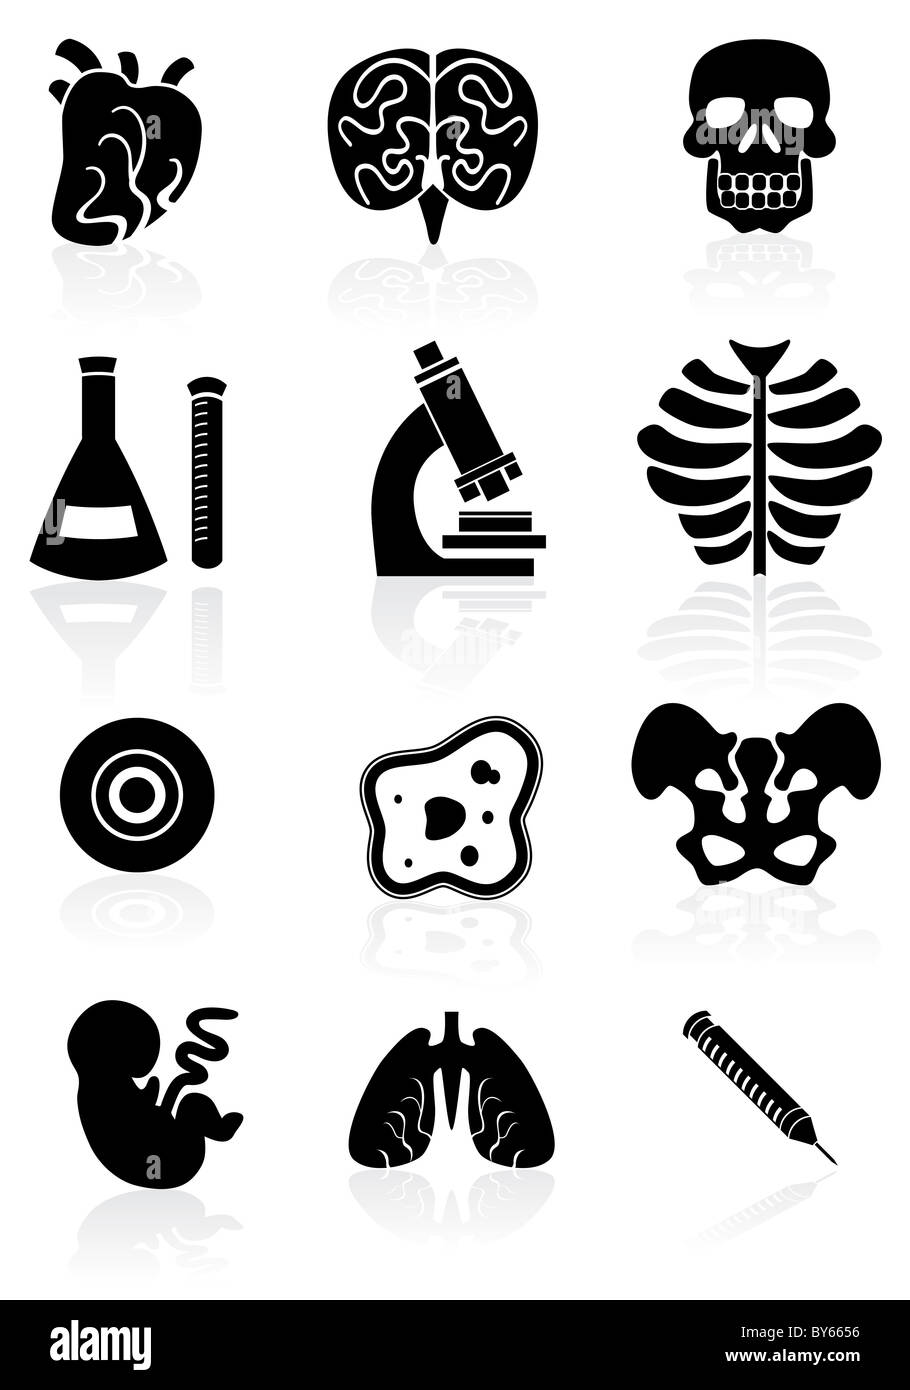 Biology themed buttons in a basic black color. Stock Photo